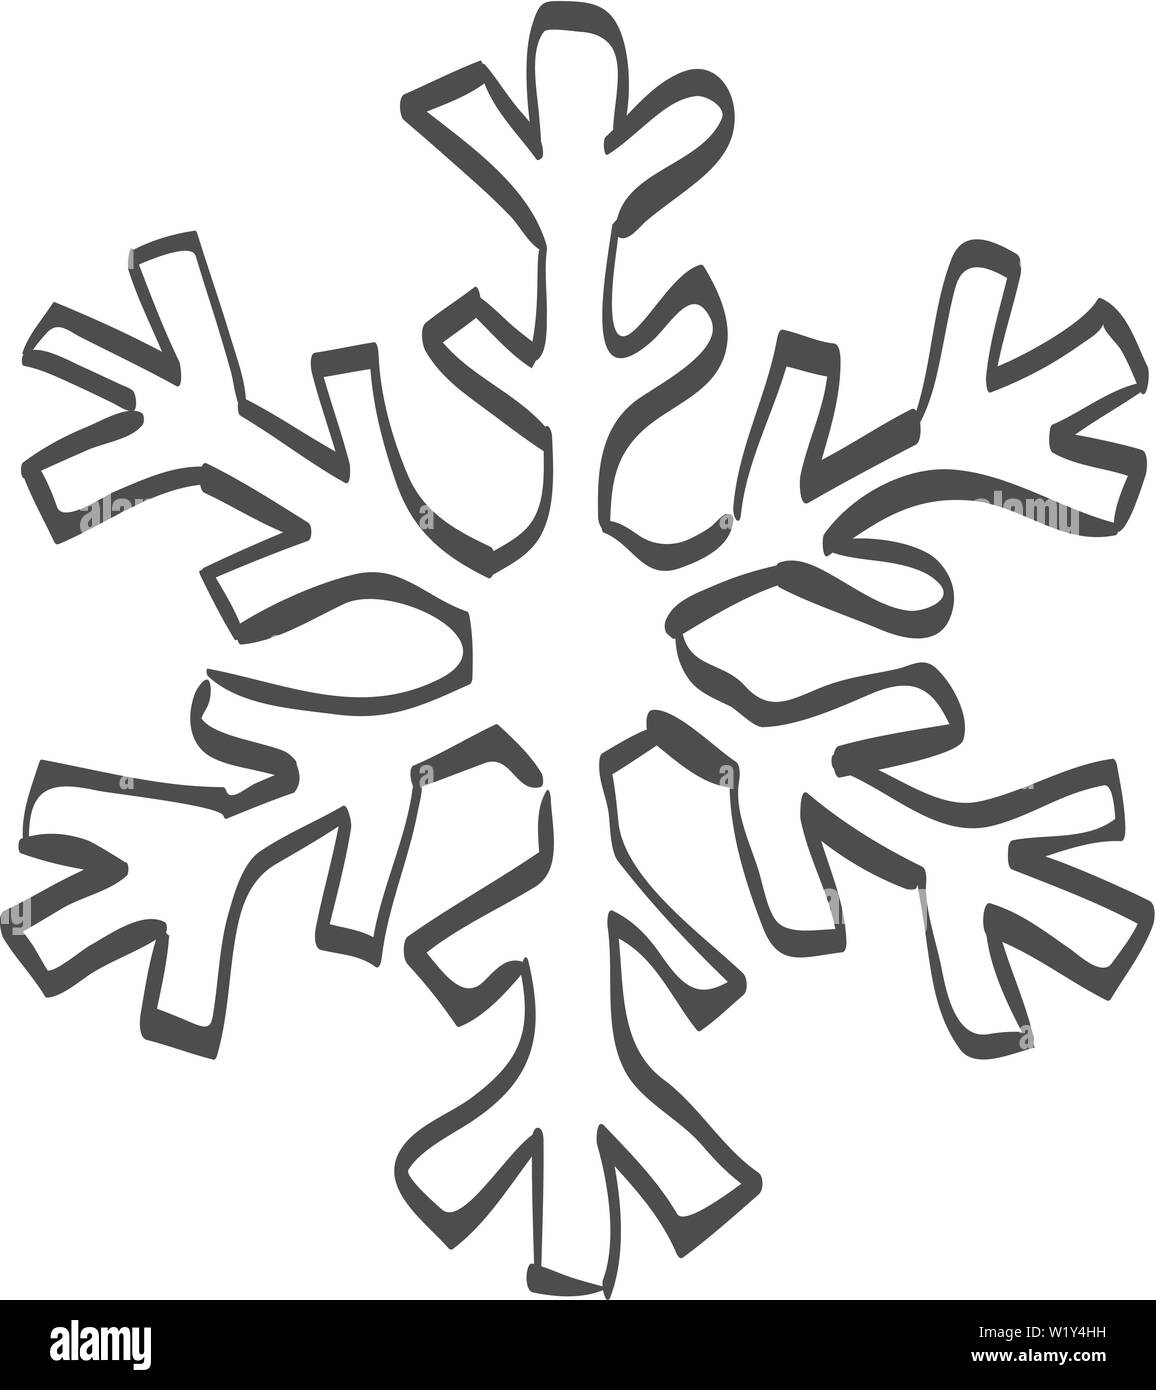 Snowflake icon in doodle sketch lines. Nature snowflakes winter